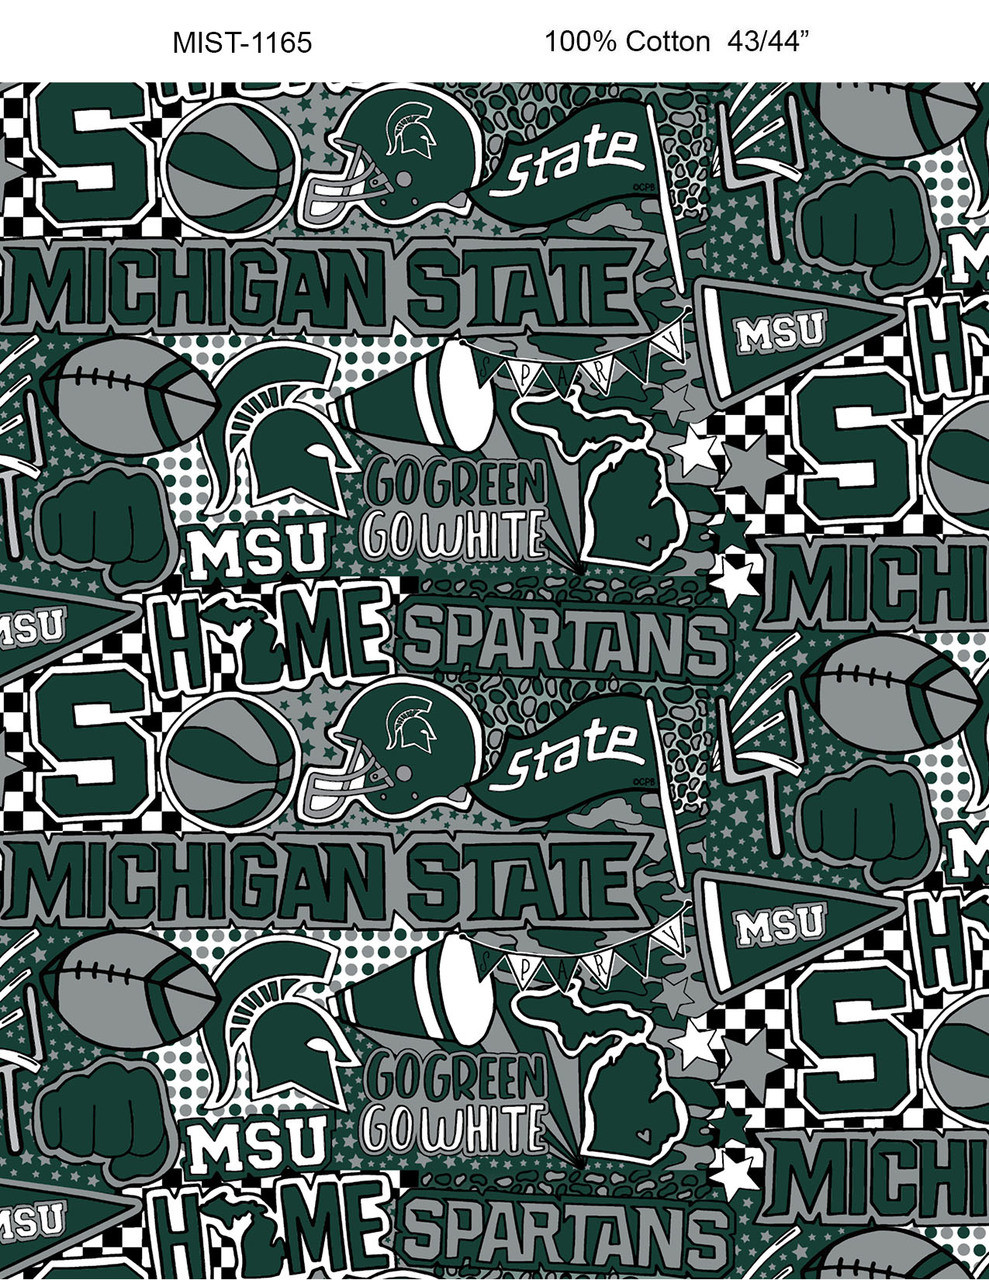 Michigan State University Spartans Cotton Fabric with Pop Art Print and Matching Solid Cotton Fabrics